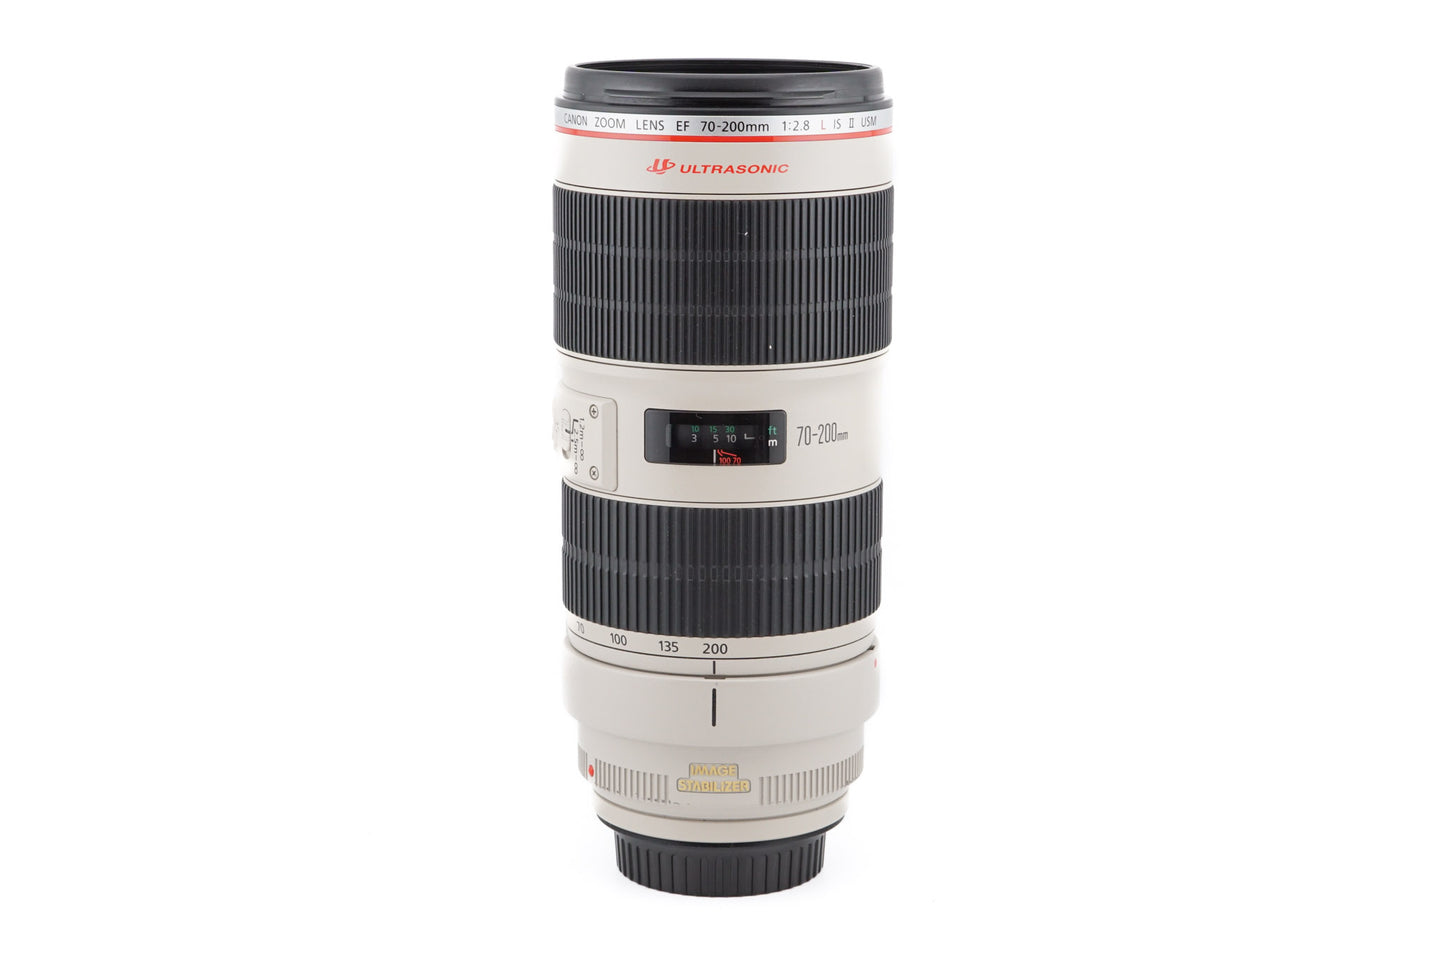 Canon 70-200mm f2.8 L IS II USM - Lens